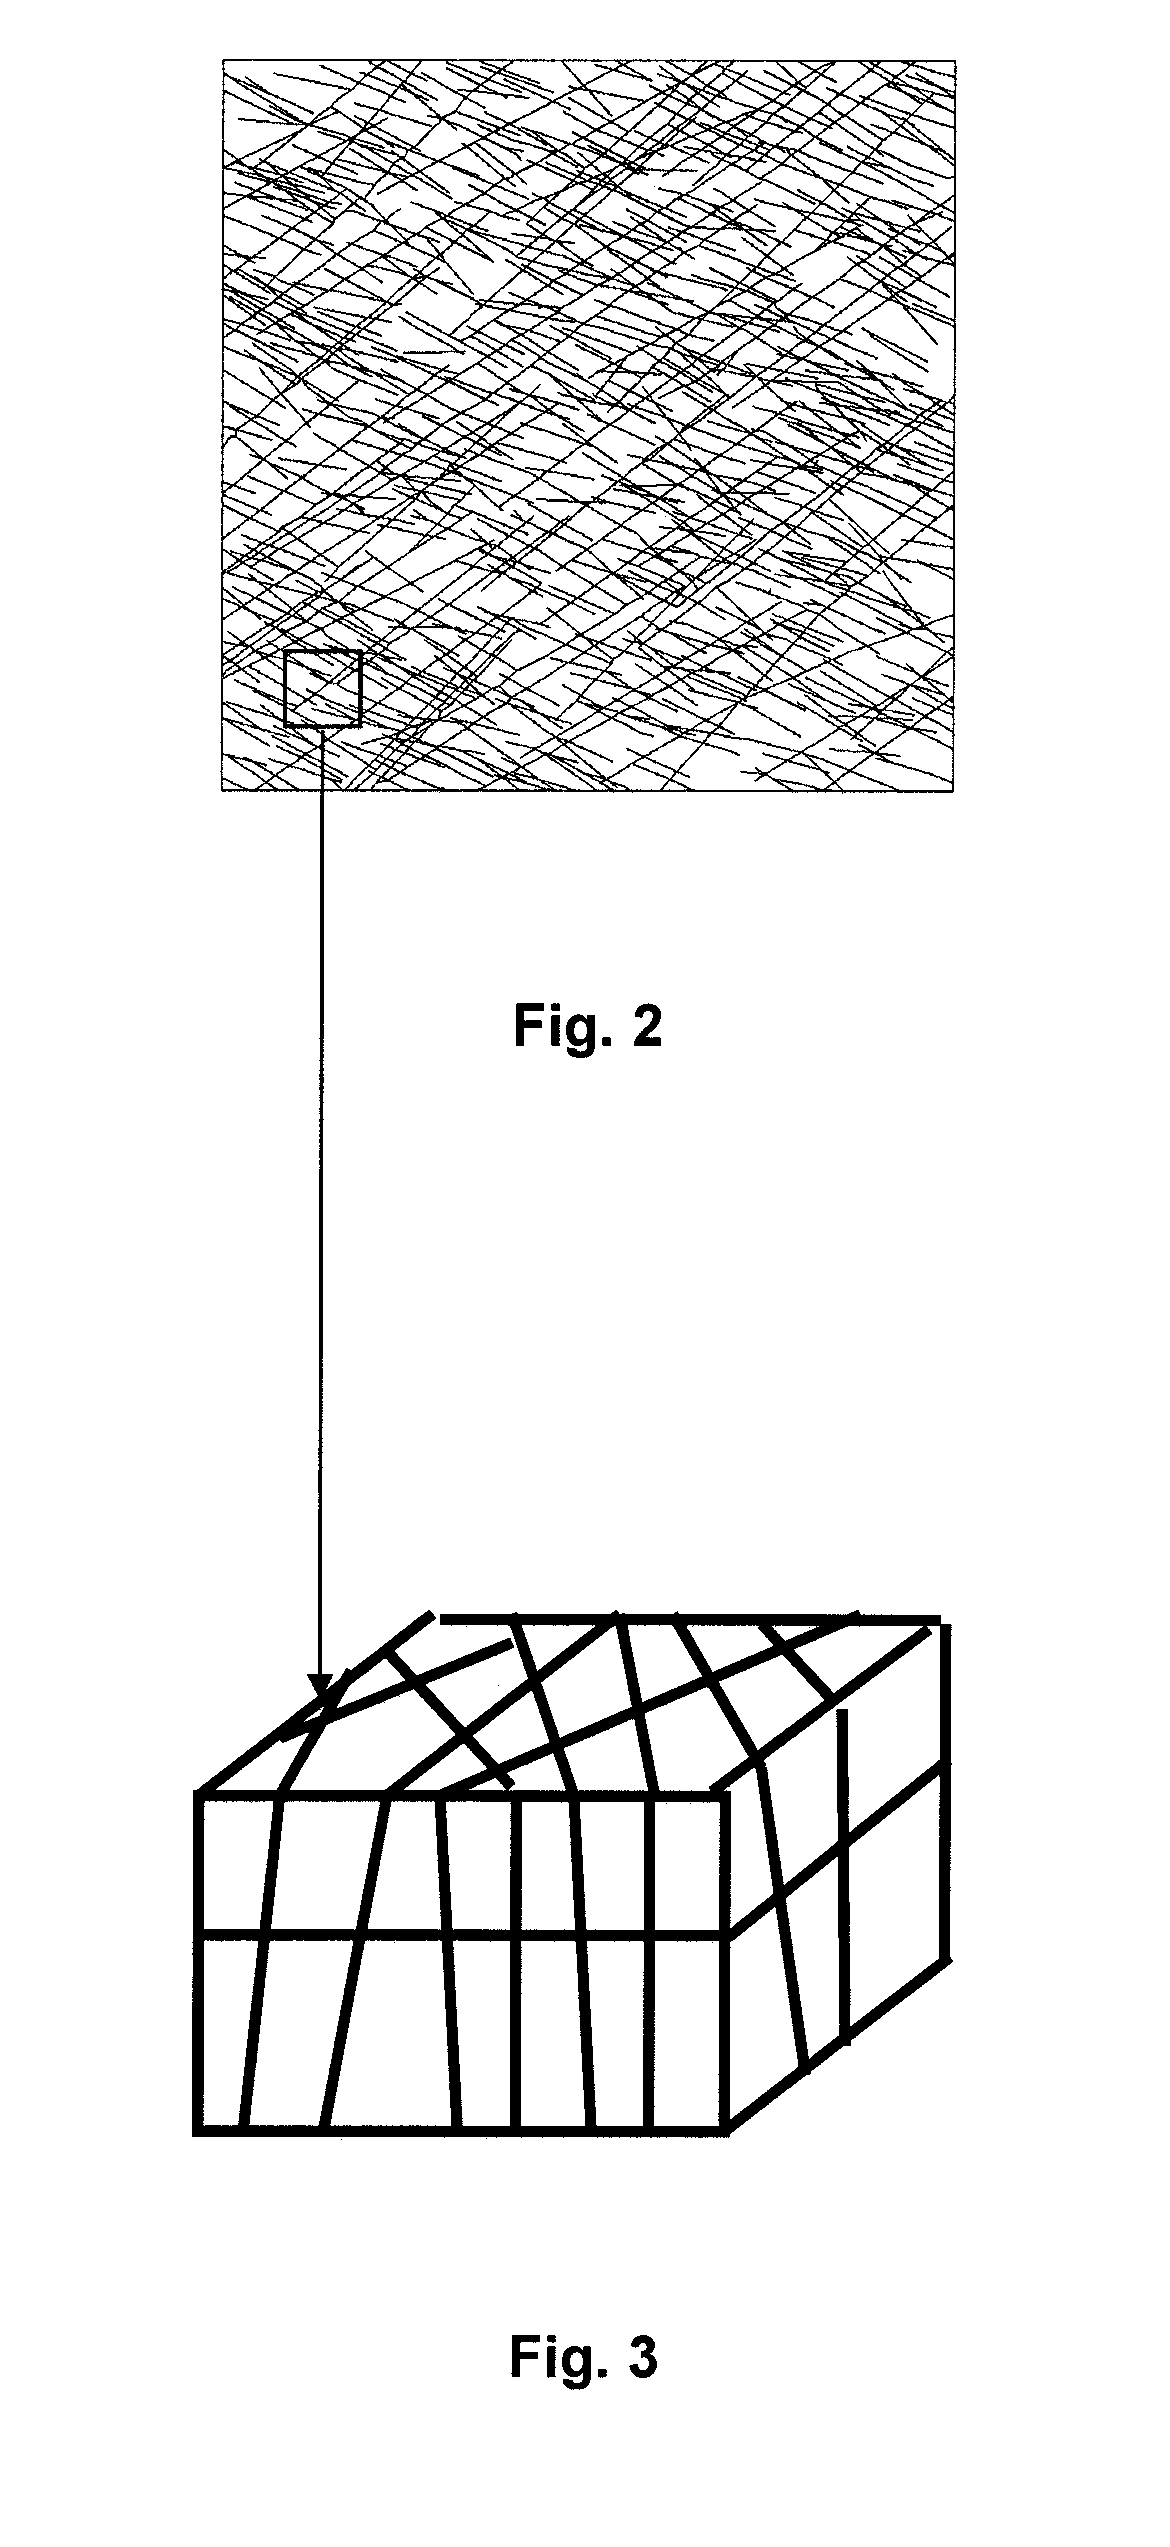 Method for characterizing the fracture network of a fractured reservoir and method for developing it